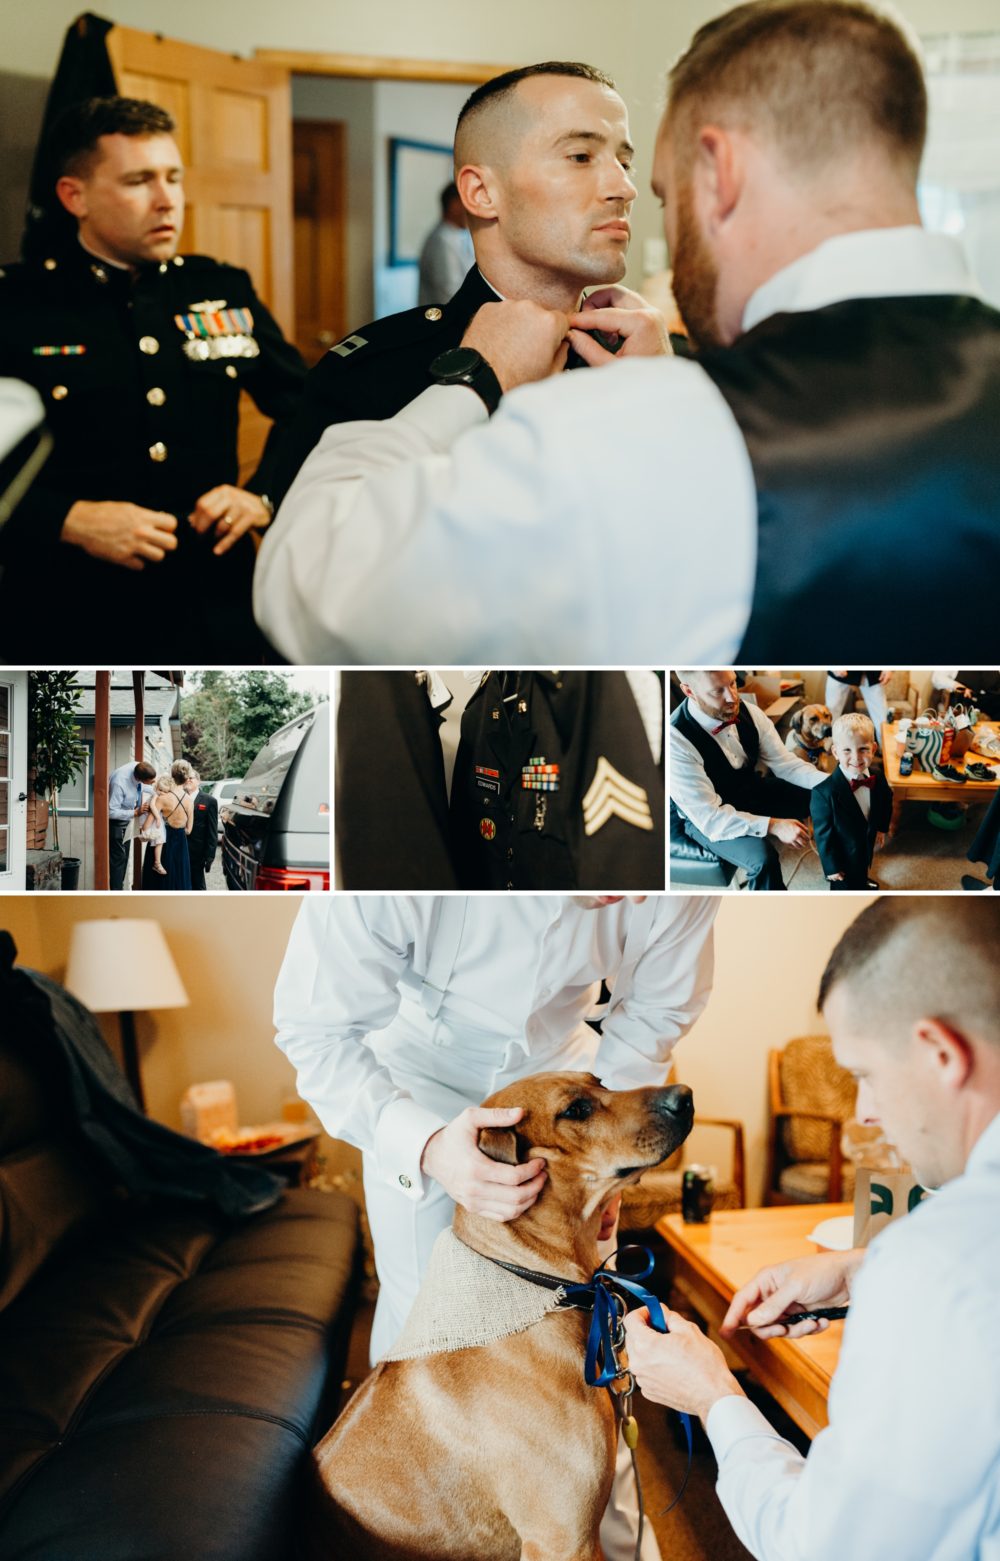 The groom gets ready - By Seattle wedding photographer Briana Morrison